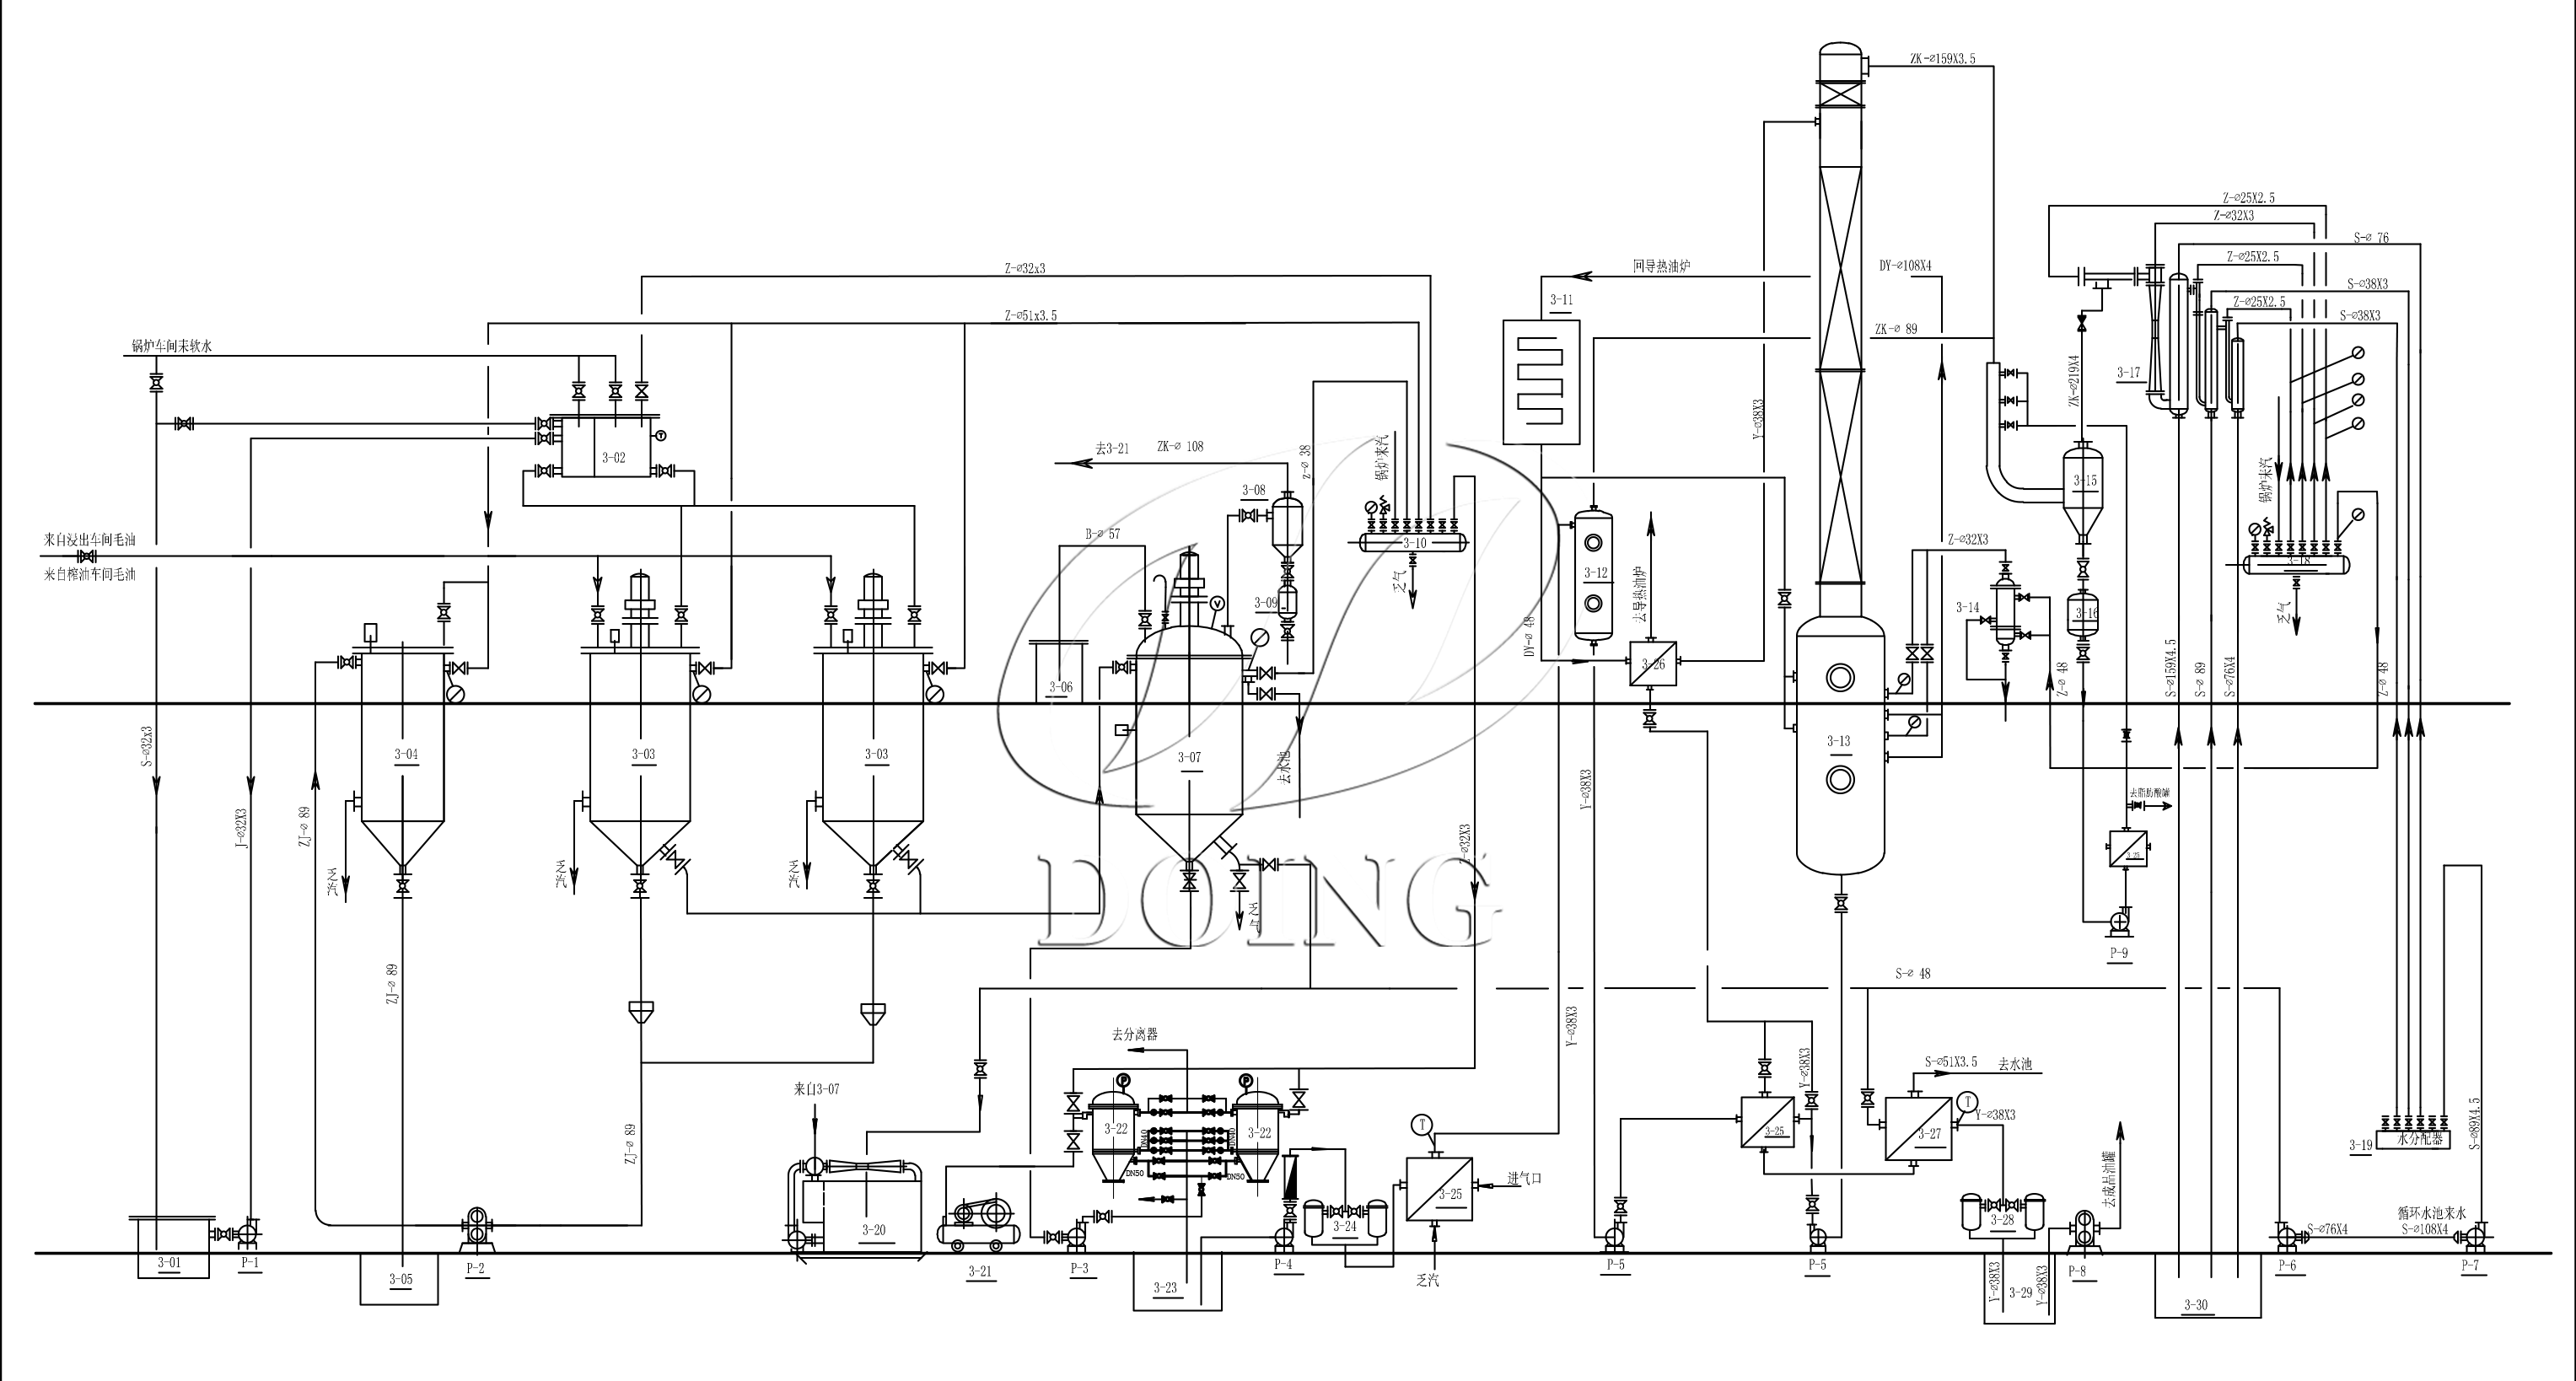 Semi-Continuous Oil Refining Process Flow Chart